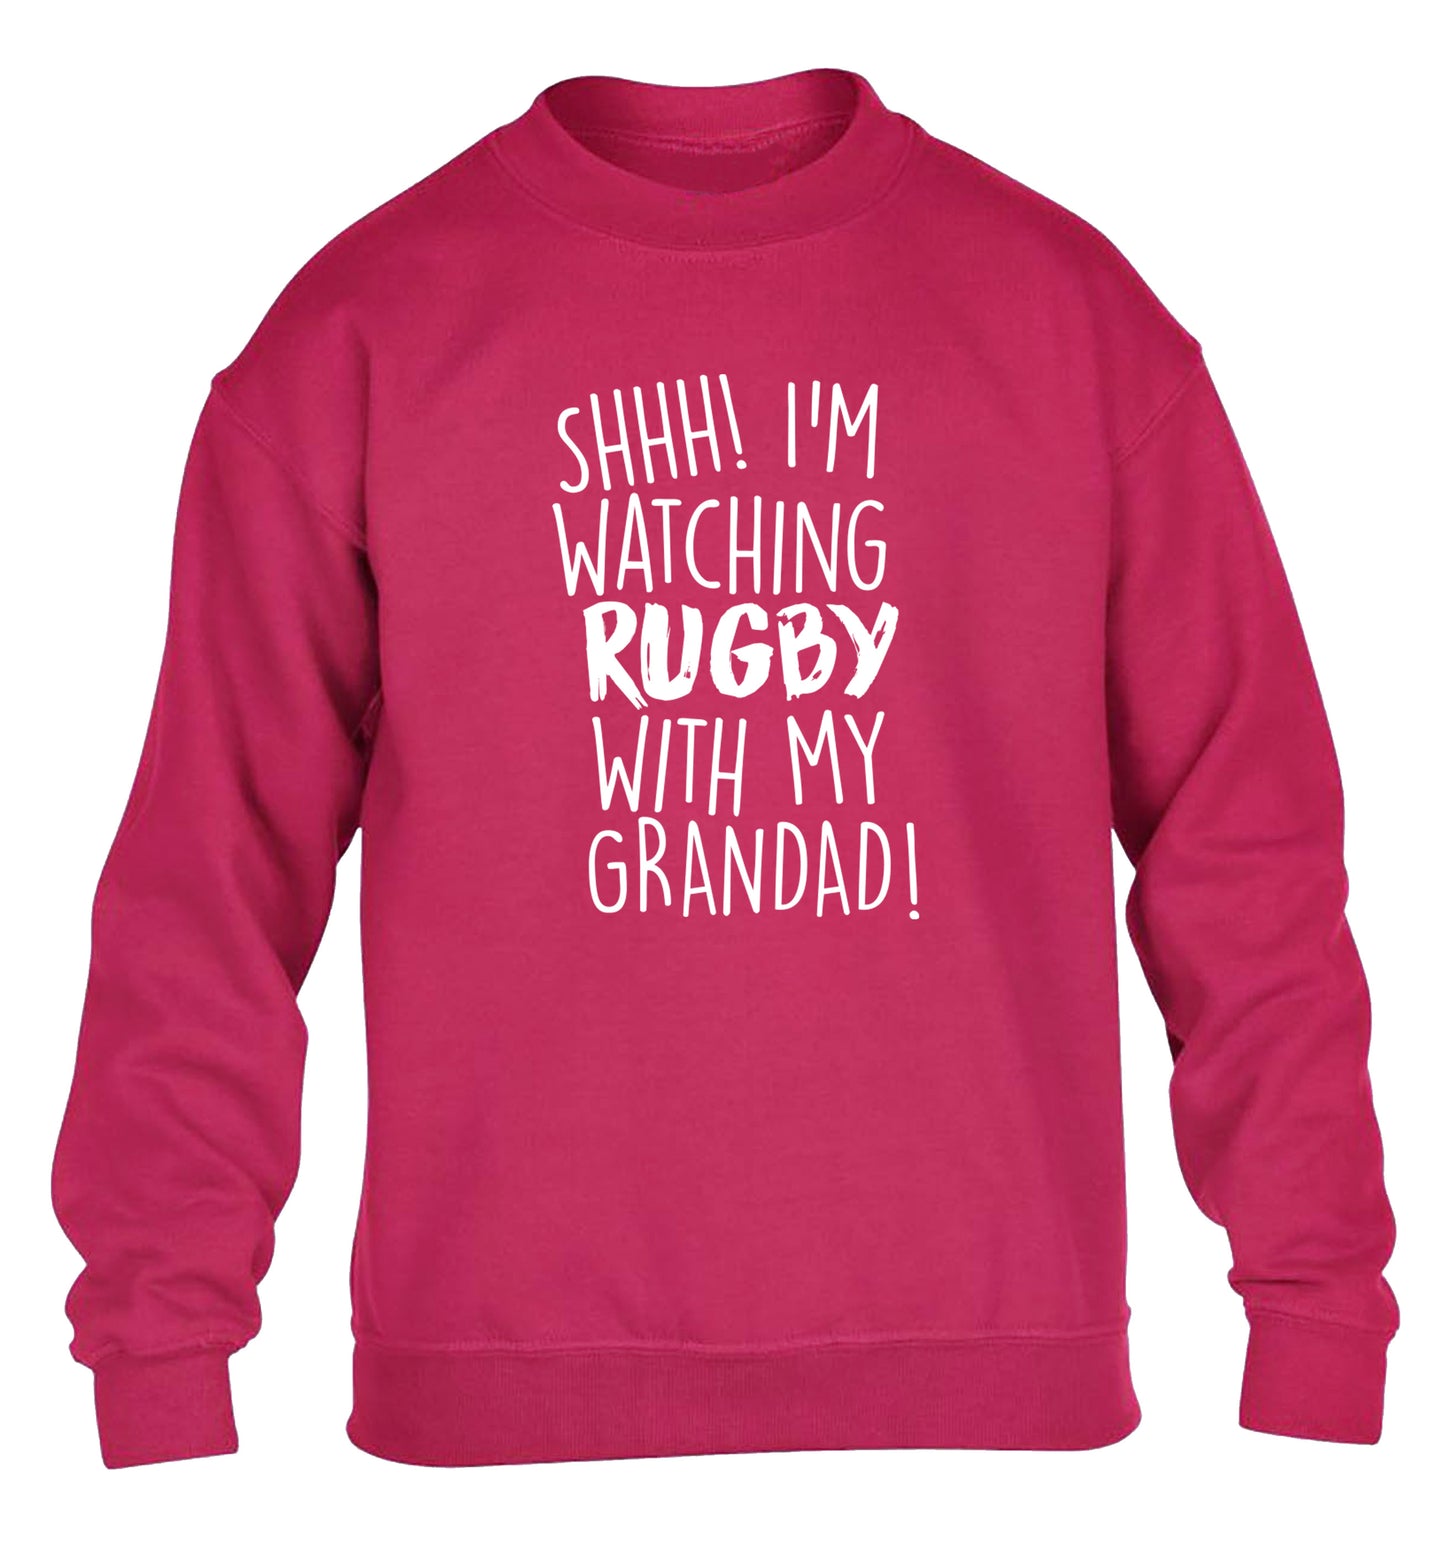 Shh I'm watching rugby with my grandad children's pink sweater 12-13 Years